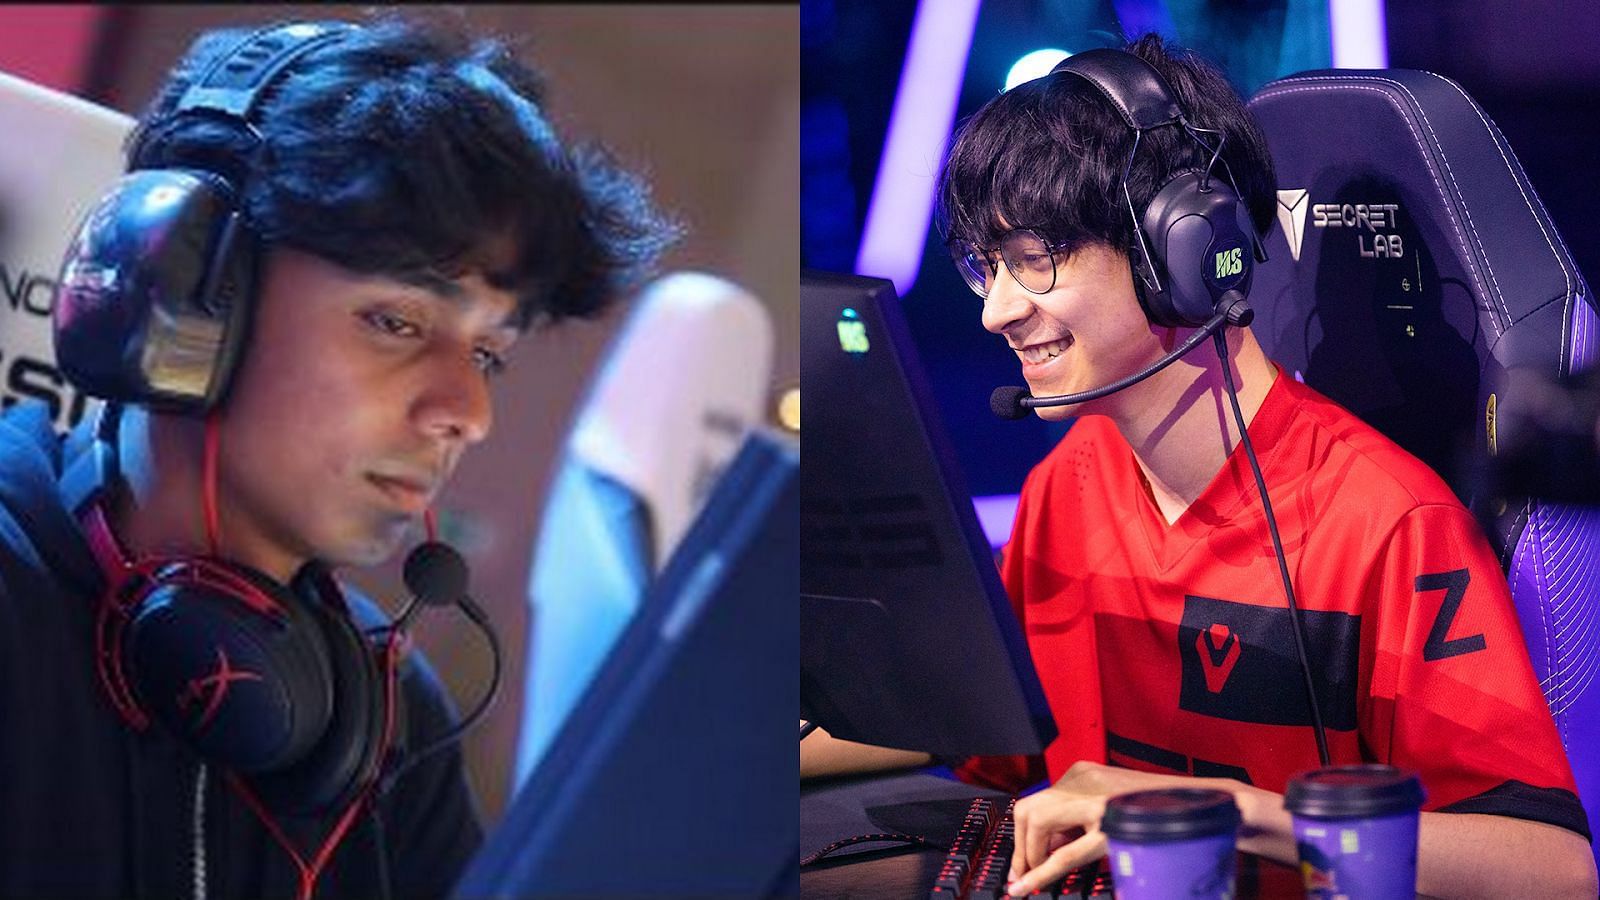 Global Esports Valorant star SkRossi would love to challenge his idol Tenz in a 1v1 (Image by Sportskeeda)